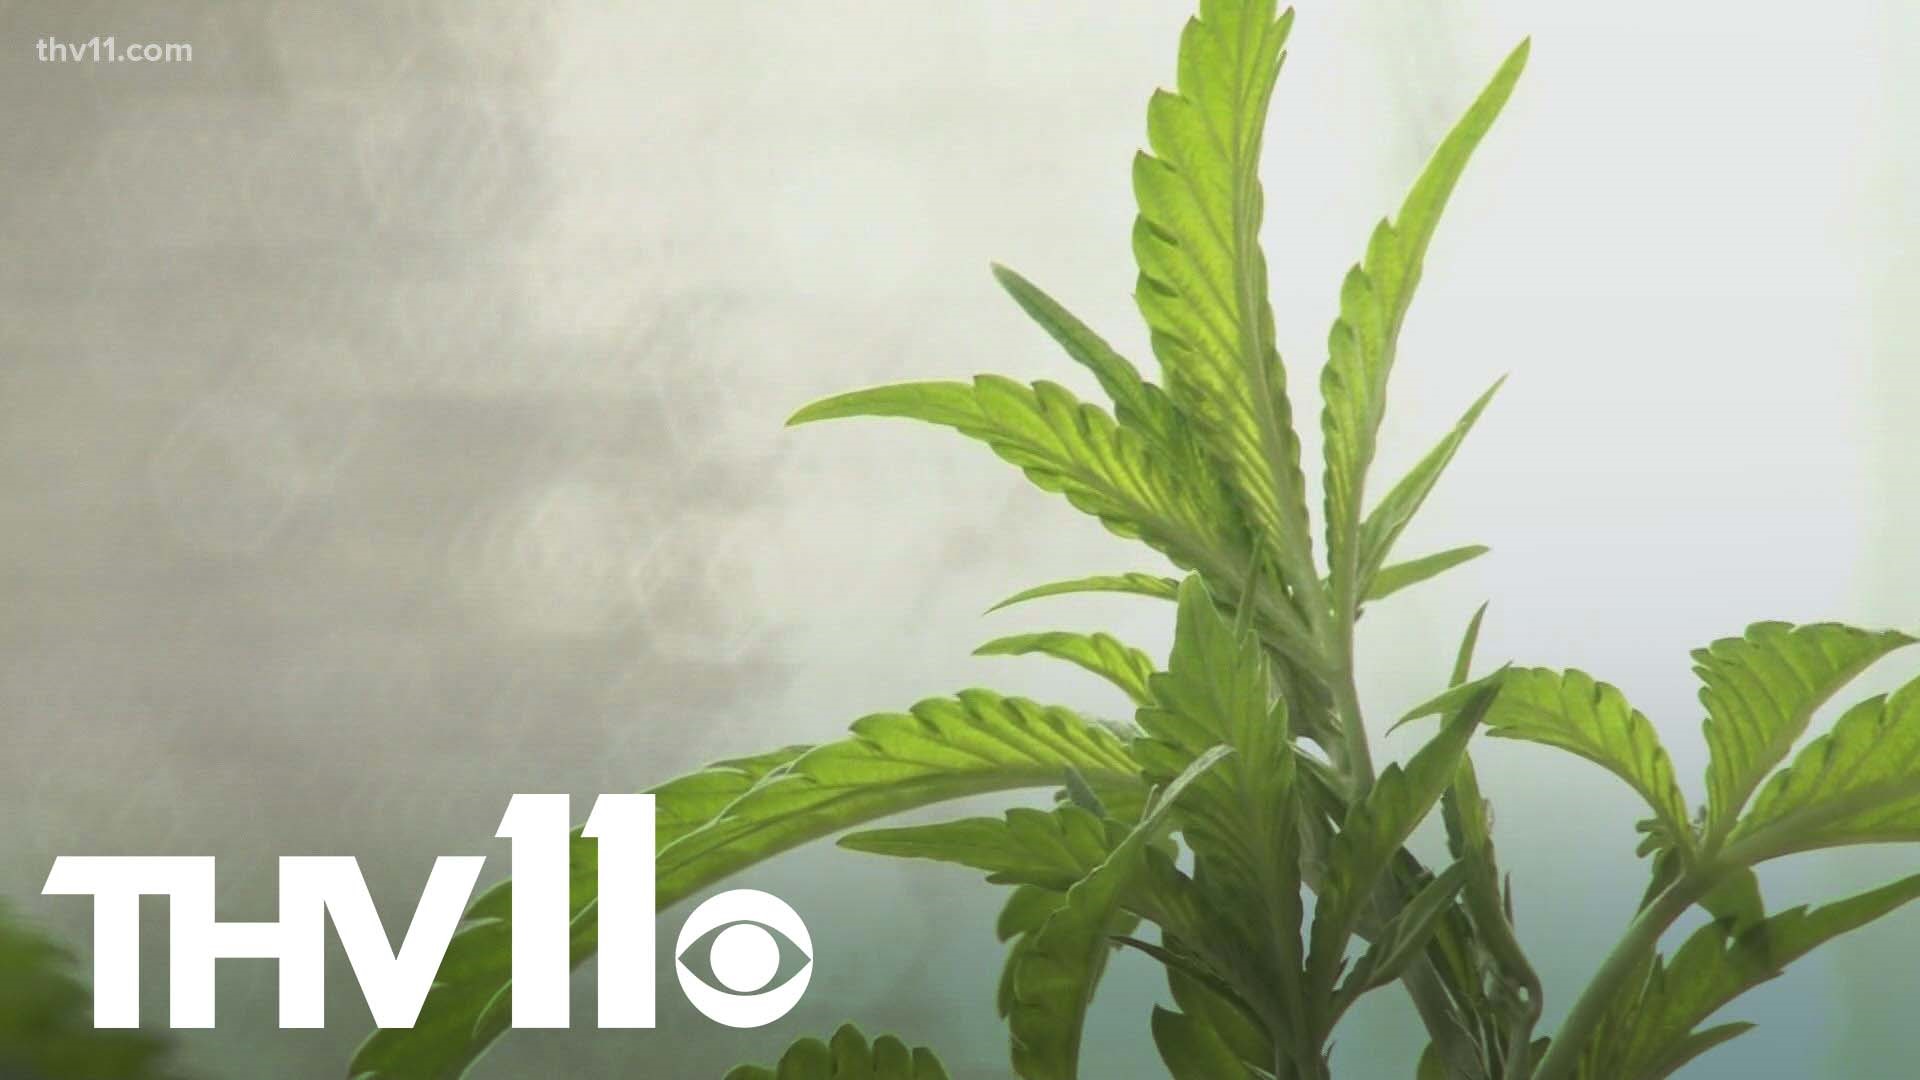 Recreational marijuana may still be illegal in Arkansas, but voters may see the issue on the 2022 general election ballot in November.